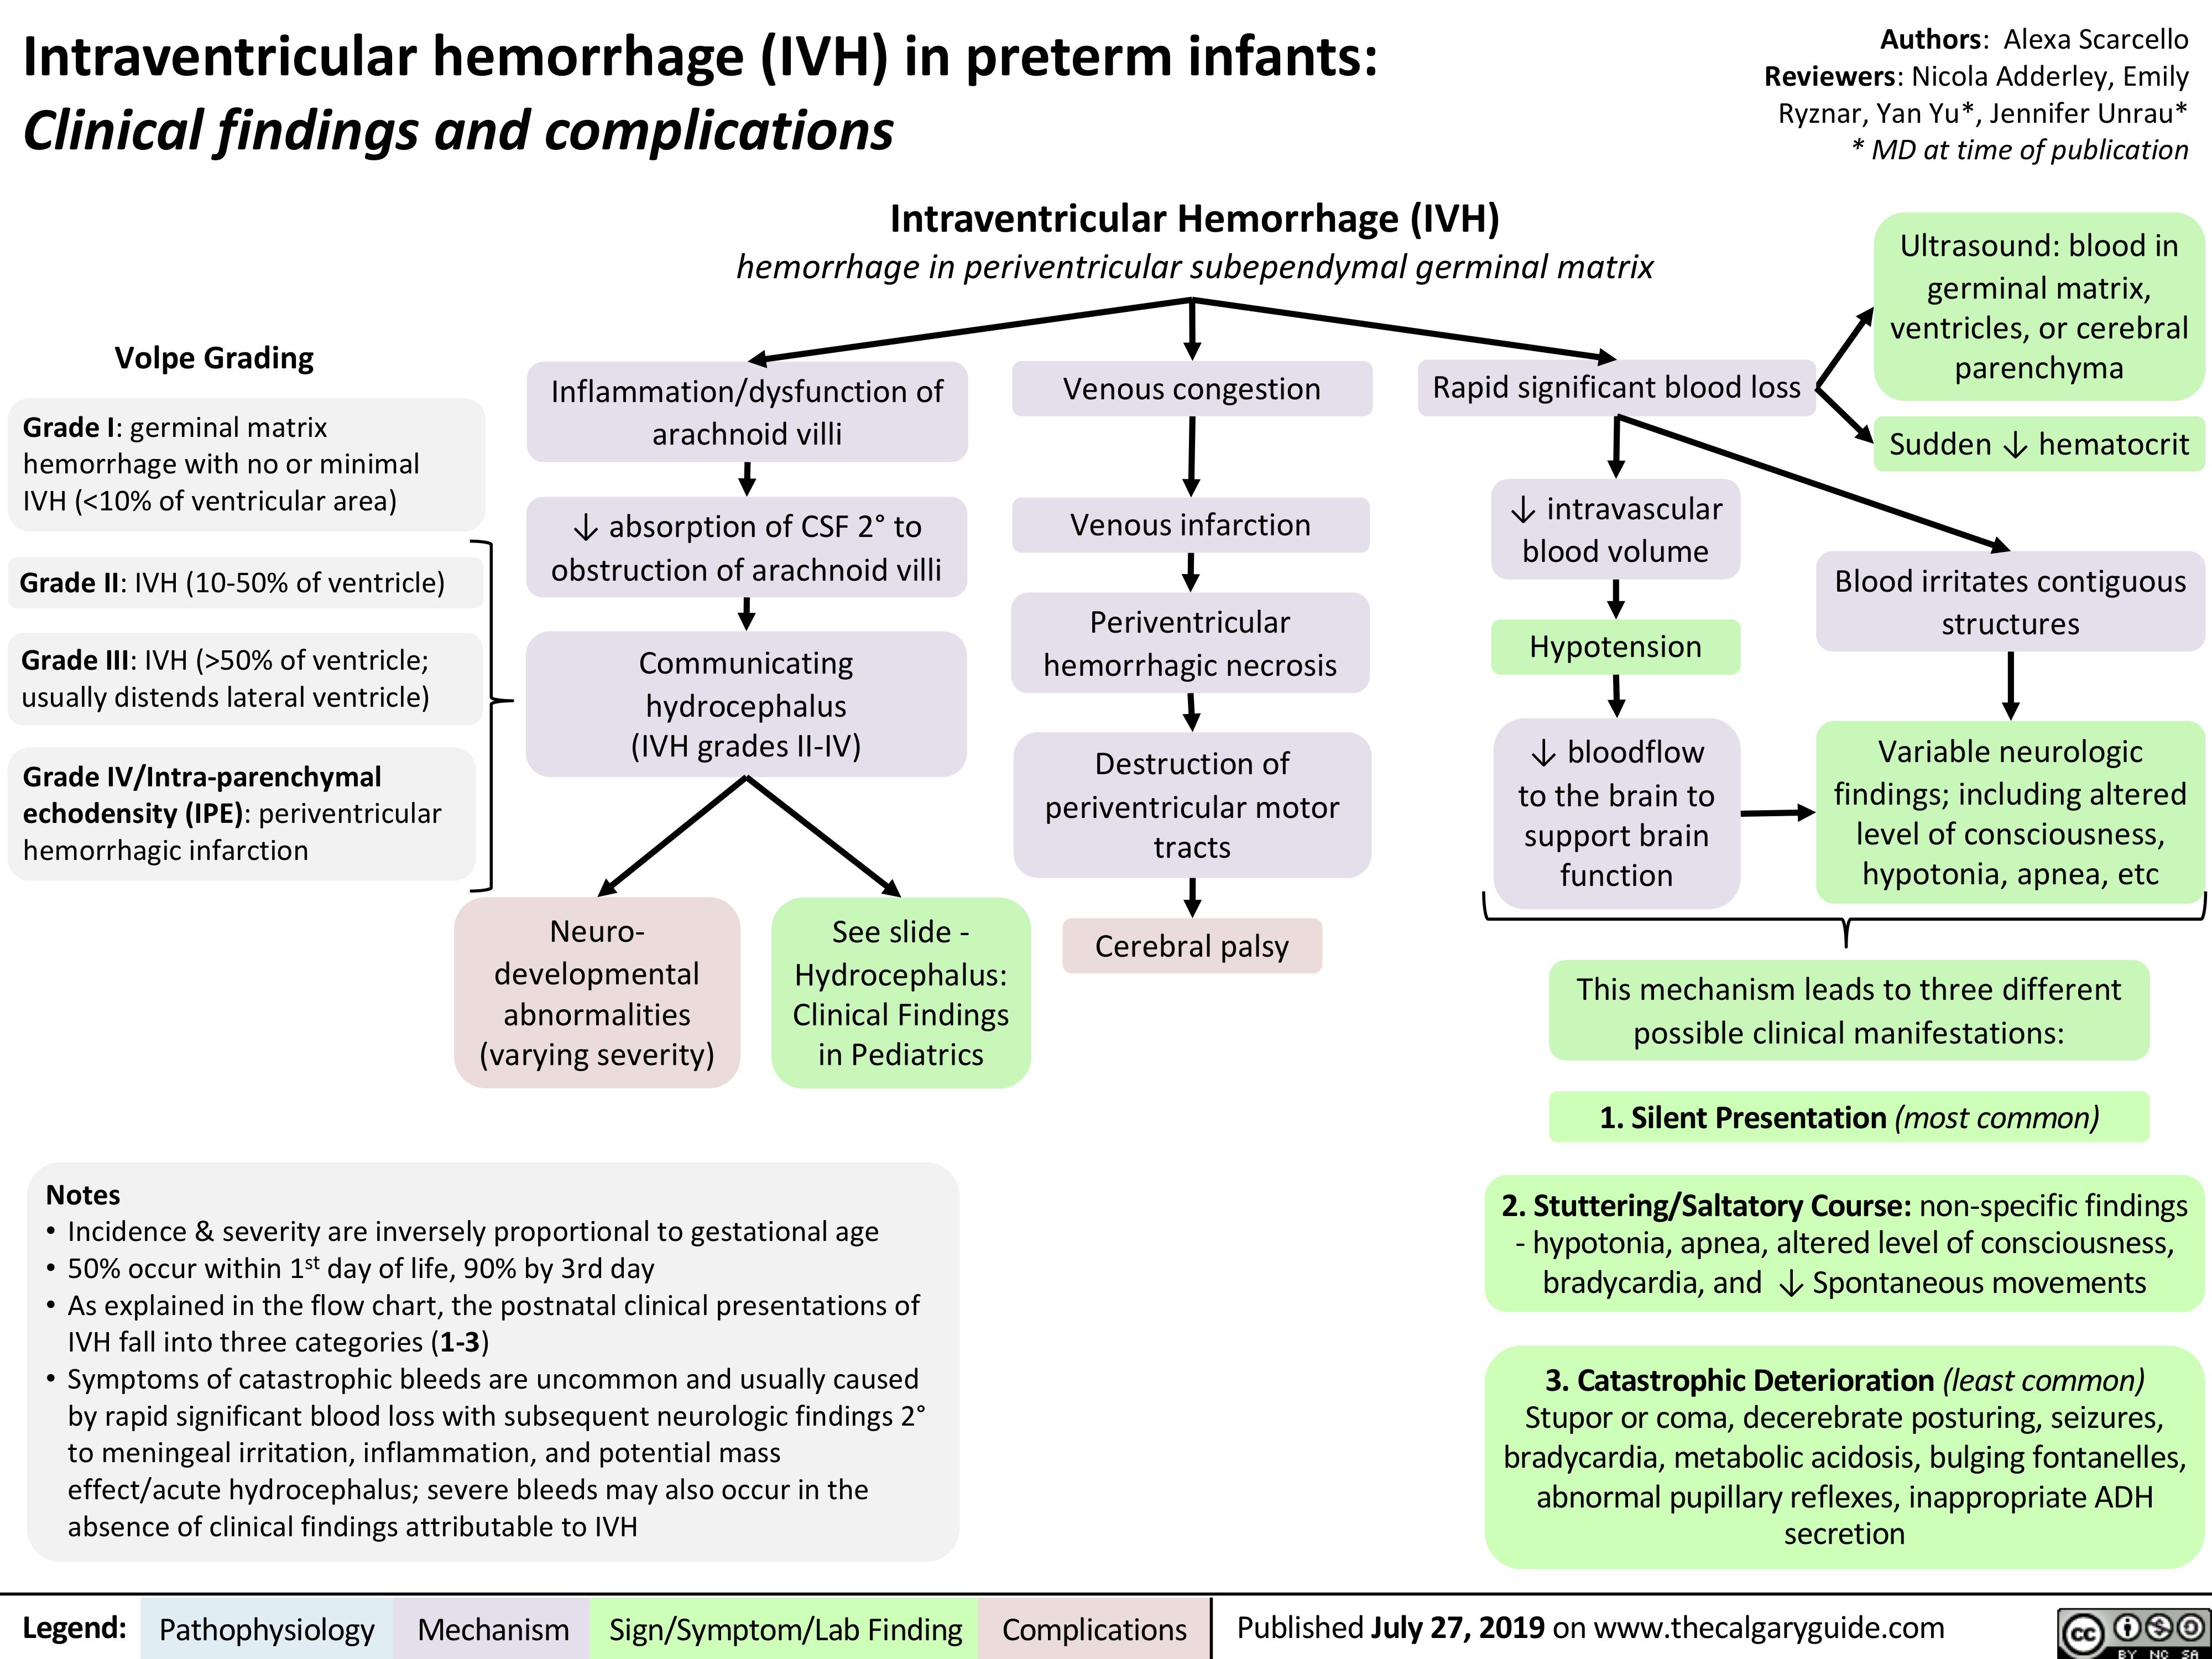 Intraventricular hemorrhage (IVH) in preterm infants:
Clinical findings and complications
Authors: Alexa Scarcello Reviewers: Nicola Adderley, Emily Ryznar, Yan Yu*, Jennifer Unrau* * MD at time of publication
Volpe Grading Grade I: germinal matrix
hemorrhage with no or minimal IVH (<10% of ventricular area)
Grade II: IVH (10-50% of ventricle) Grade III: IVH (>50% of ventricle;
usually distends lateral ventricle)
Grade IV/Intra-parenchymal echodensity (IPE): periventricular hemorrhagic infarction
Inflammation/dysfunction of arachnoid villi
↓ absorption of CSF 2° to obstruction of arachnoid villi
Communicating hydrocephalus (IVH grades II-IV)
Venous congestion
Venous infarction
Periventricular hemorrhagic necrosis
Destruction of periventricular motor tracts
Cerebral palsy
Rapid significant blood loss
↓ intravascular blood volume
Hypotension
↓ bloodflow to the brain to support brain function
Intraventricular Hemorrhage (IVH)
hemorrhage in periventricular subependymal germinal matrix
Ultrasound: blood in germinal matrix, ventricles, or cerebral parenchyma
Sudden ↓ hematocrit
Blood irritates contiguous structures
Variable neurologic findings; including altered level of consciousness, hypotonia, apnea, etc
                                      Neuro- developmental abnormalities (varying severity)
See slide - Hydrocephalus: Clinical Findings in Pediatrics
This mechanism leads to three different possible clinical manifestations:
1. Silent Presentation (most common)
2. Stuttering/Saltatory Course: non-specific findings - hypotonia, apnea, altered level of consciousness, bradycardia, and ↓ Spontaneous movements
3. Catastrophic Deterioration (least common) Stupor or coma, decerebrate posturing, seizures, bradycardia, metabolic acidosis, bulging fontanelles, abnormal pupillary reflexes, inappropriate ADH secretion
    Notes
 • Incidence & severity are inversely proportional to gestational age
• 50% occur within 1st day of life, 90% by 3rd day
• As explained in the flow chart, the postnatal clinical presentations of
IVH fall into three categories (1-3)
• Symptoms of catastrophic bleeds are uncommon and usually caused
by rapid significant blood loss with subsequent neurologic findings 2° to meningeal irritation, inflammation, and potential mass effect/acute hydrocephalus; severe bleeds may also occur in the absence of clinical findings attributable to IVH
  Legend:
 Pathophysiology
 Mechanism
Sign/Symptom/Lab Finding
  Complications
Published July 27, 2019 on www.thecalgaryguide.com
   